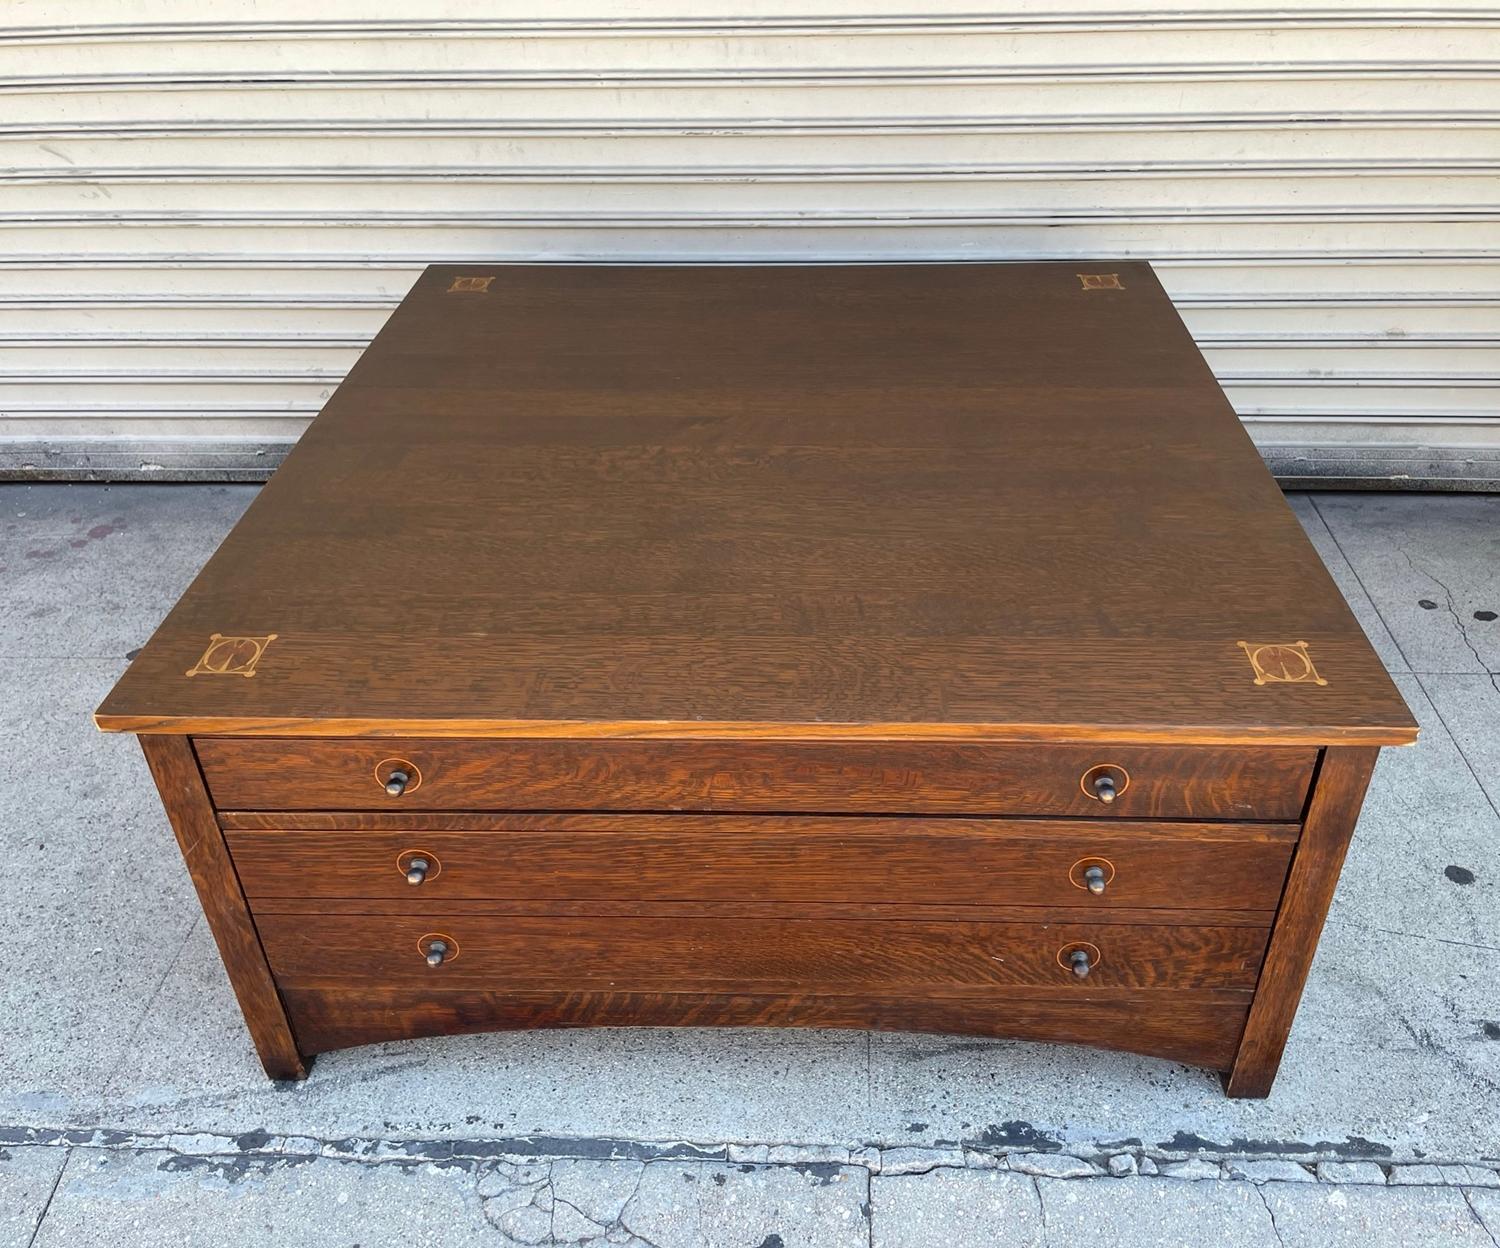 Mission style coffee table by Stickley.

One shallow drawer and one deep, double drawer on each side for a total of four drawers.

Made in solid oak.

Measurements:
40 inches square x 19 inches high.